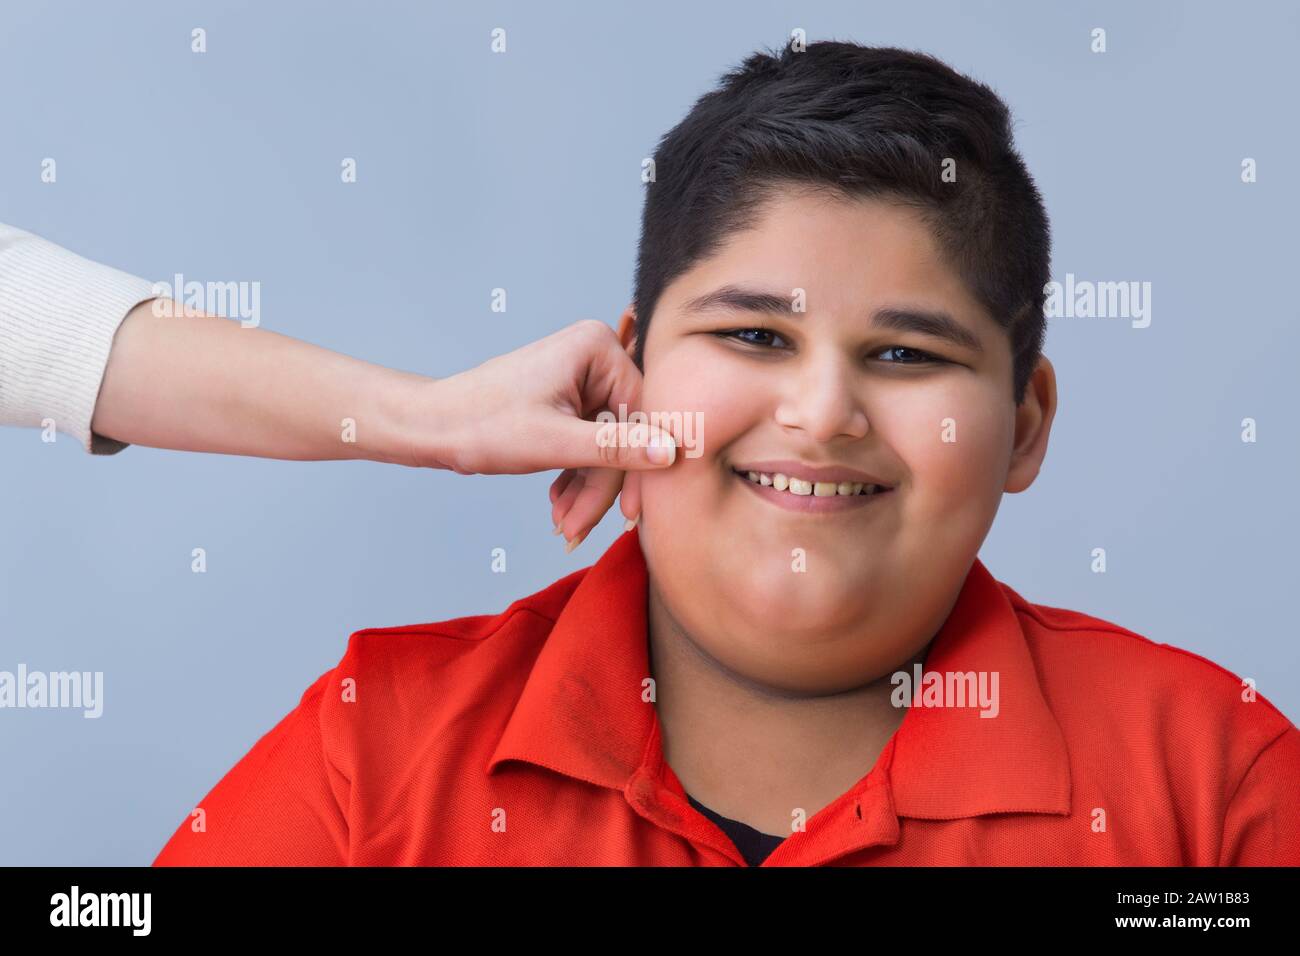 Young boy getting his chubby cheeks pulled. (Obesity) Stock Photo